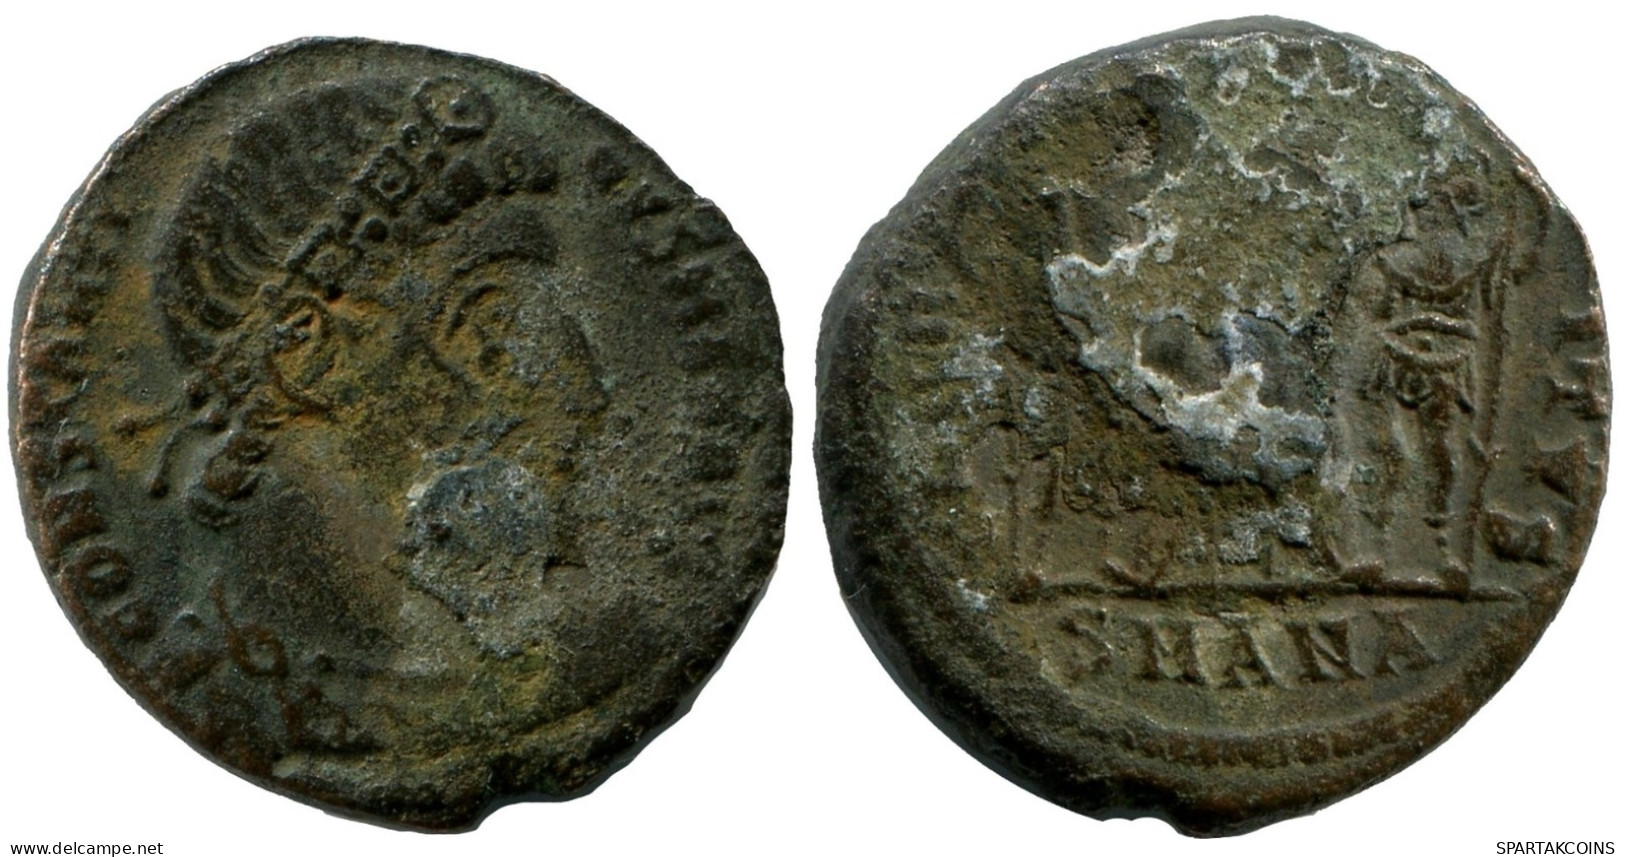 CONSTANTINE I MINTED IN ANTIOCH FOUND IN IHNASYAH HOARD EGYPT #ANC10594.14.U.A - The Christian Empire (307 AD To 363 AD)